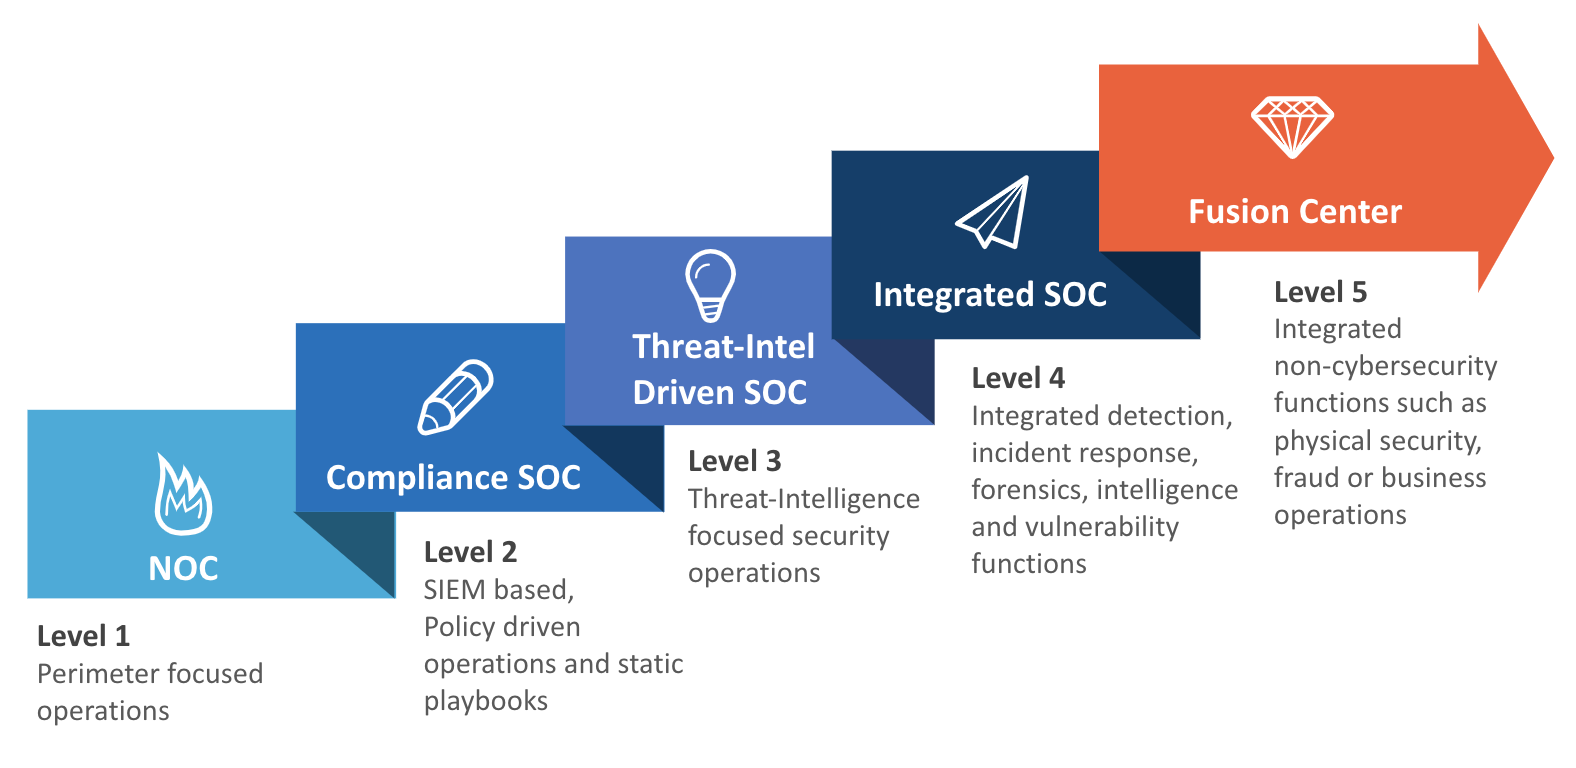 Evolution of Cyber Operations